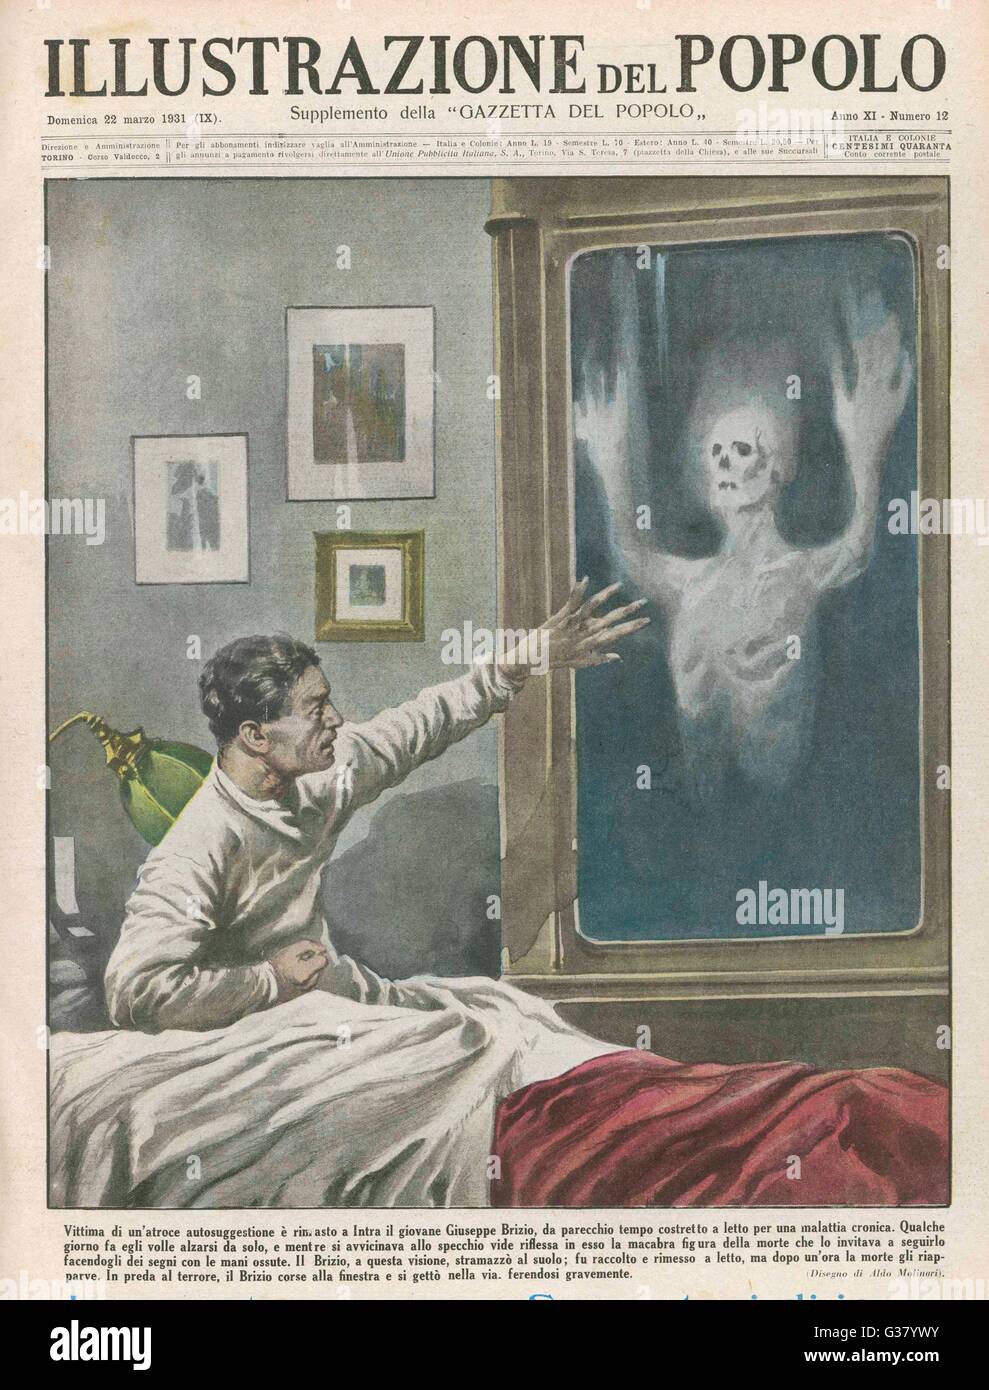 Chronic invalid Giuseppe  Brizio of Intra, Italy, sees  the figure of Death in a  mirror, beckoning him ; he  collapses and dies, a victim  of auto-suggestion     Date: 1931 Stock Photo